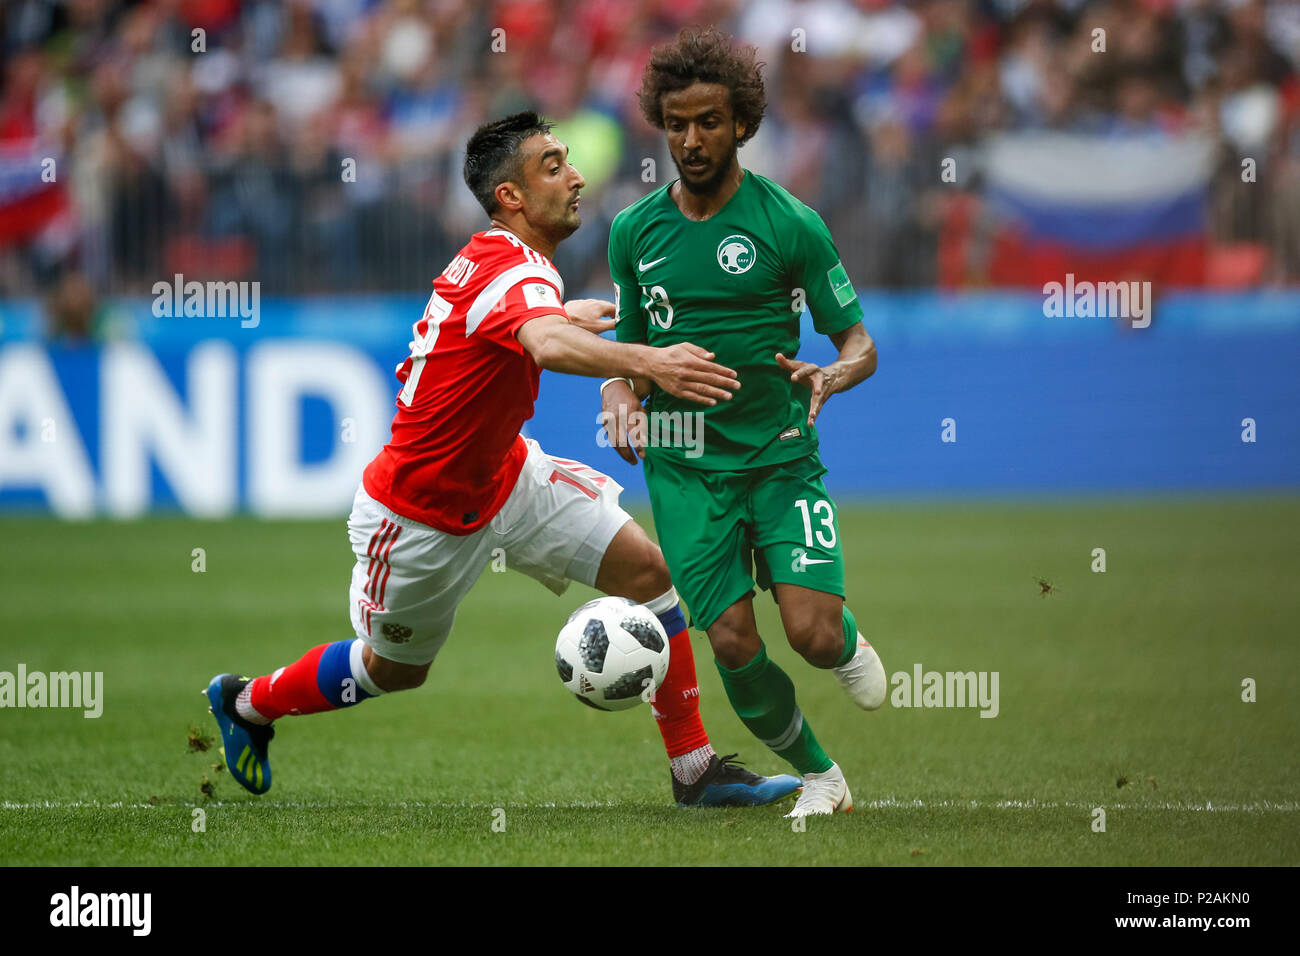 Moscow, Russia. 14th June 2018. Aleksandr Samedov of Russia and Yasser Al-Shahrani of Saudi Arabia during the 2018 FIFA World Cup Group A match between Russia and Saudi Arabia at Luzhniki Stadium on June 14th 2018 in Moscow, Russia. Credit: PHC Images/Alamy Live News Stock Photo